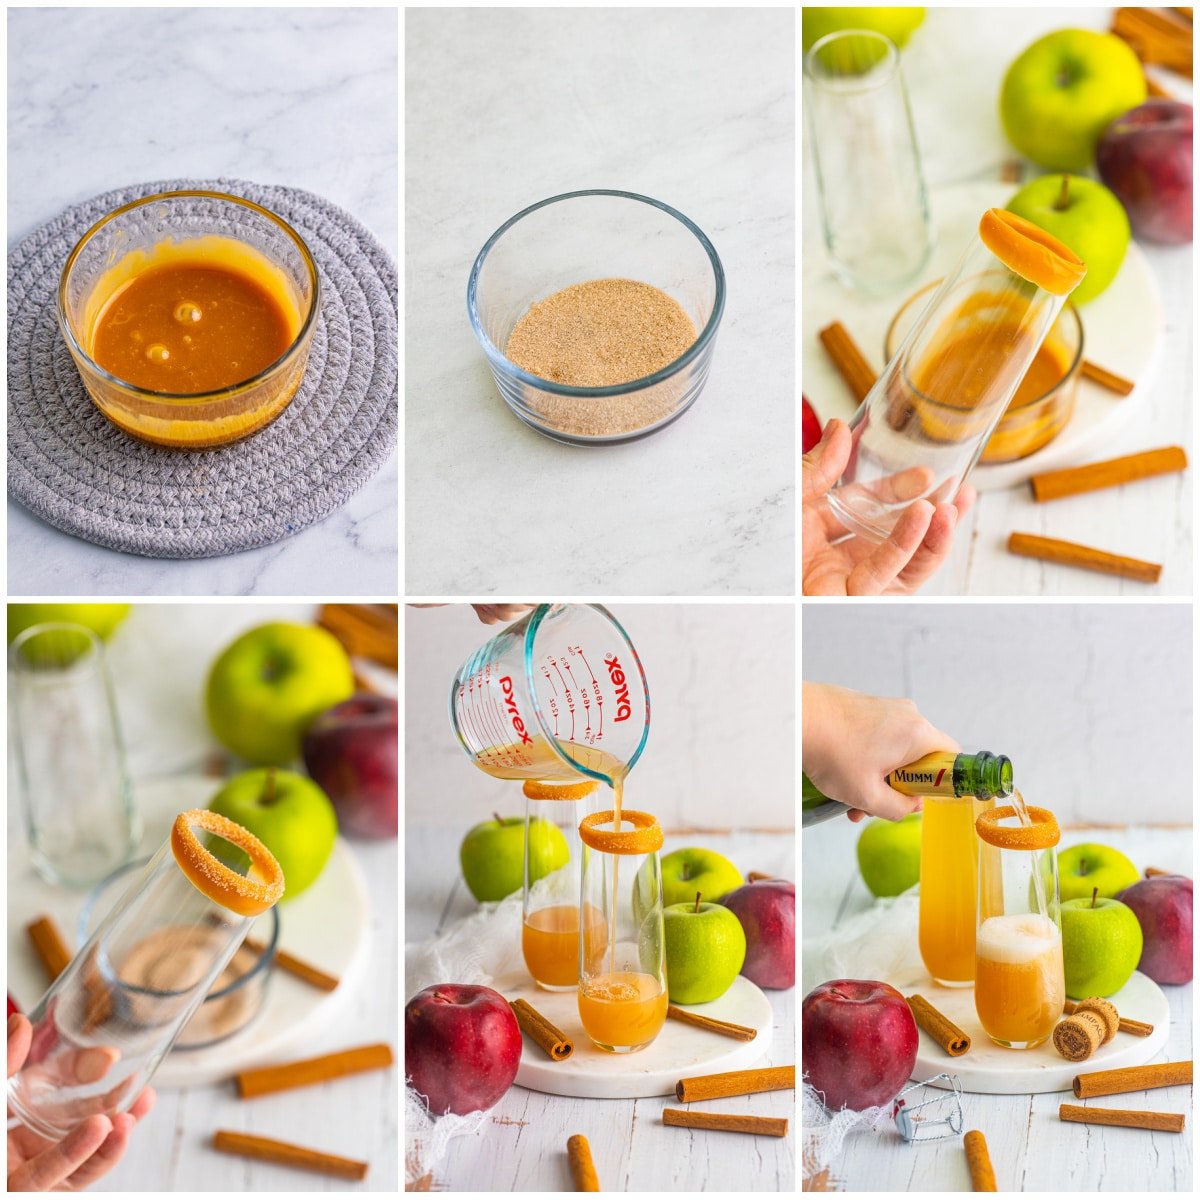 Step by step photos on how to make Apple Cider Mimosas.